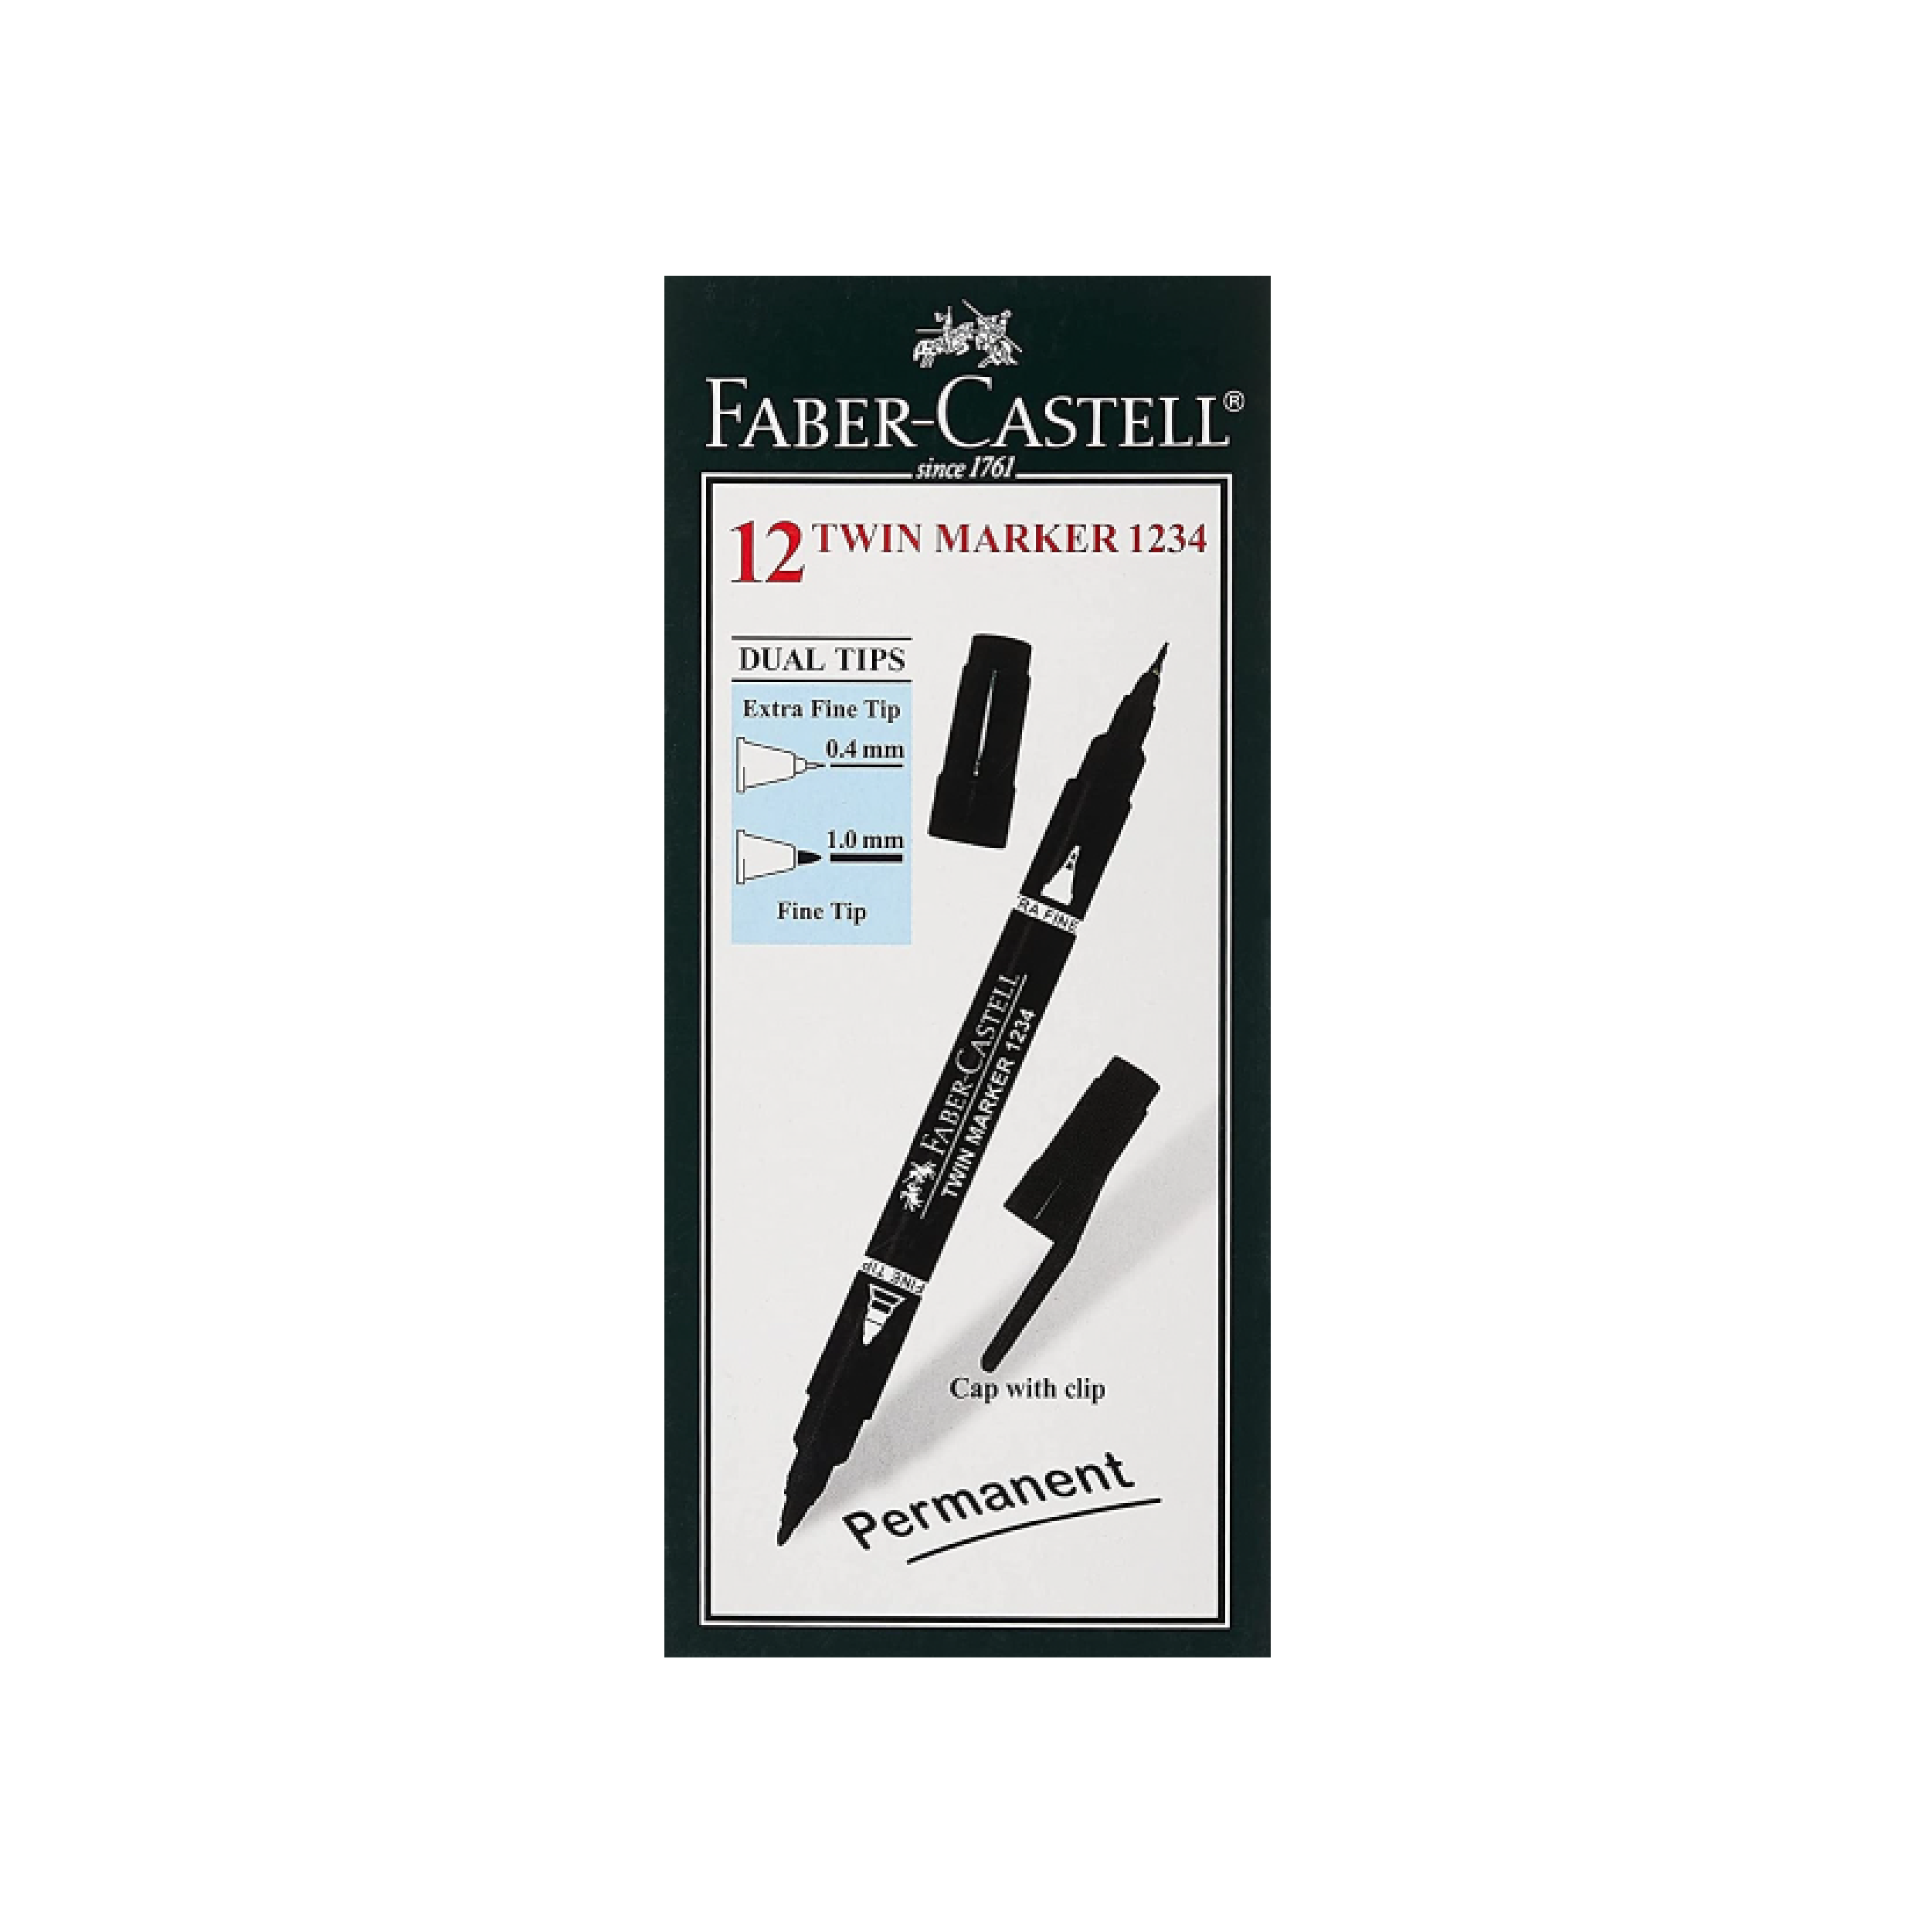 Faber-Castell Permanent Twin Marker, Twin Tip, Black (1234)